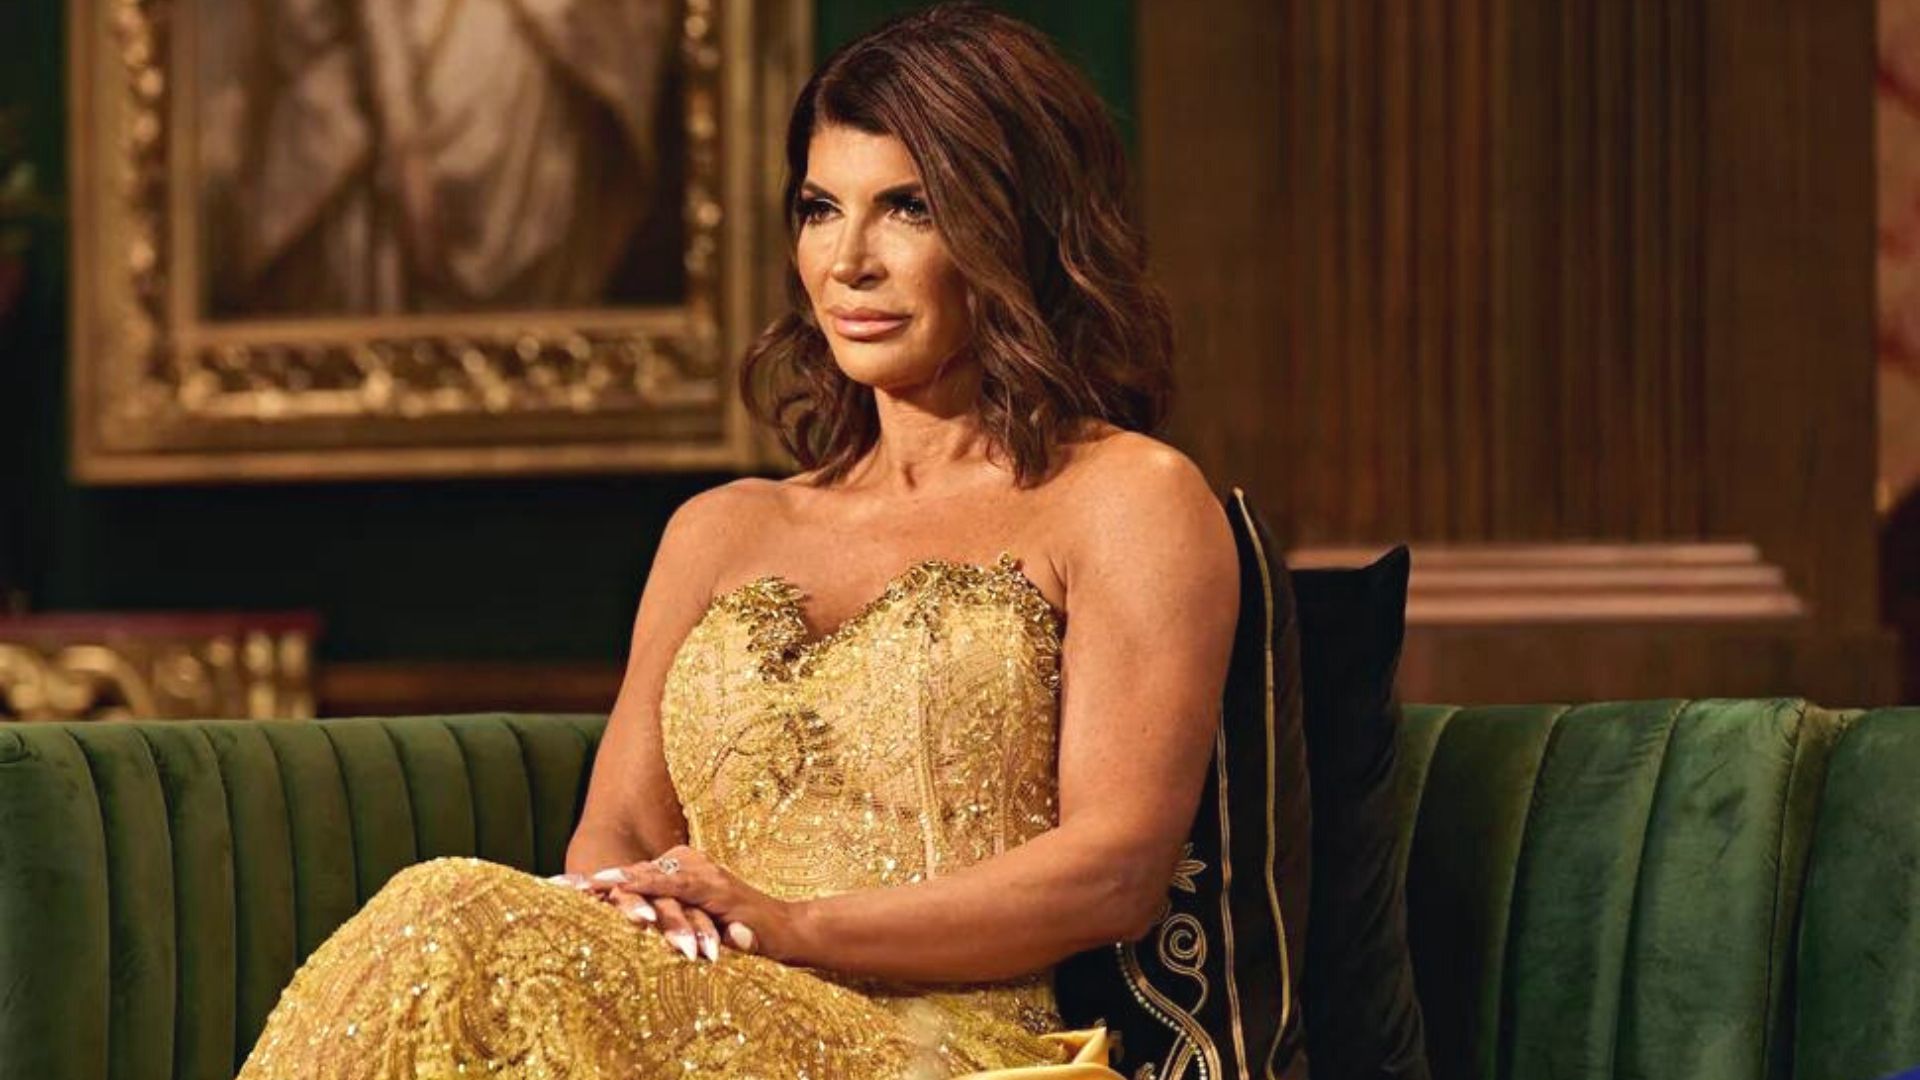 Real Housewives of New Jersey season 13 next episode and more What to Watch